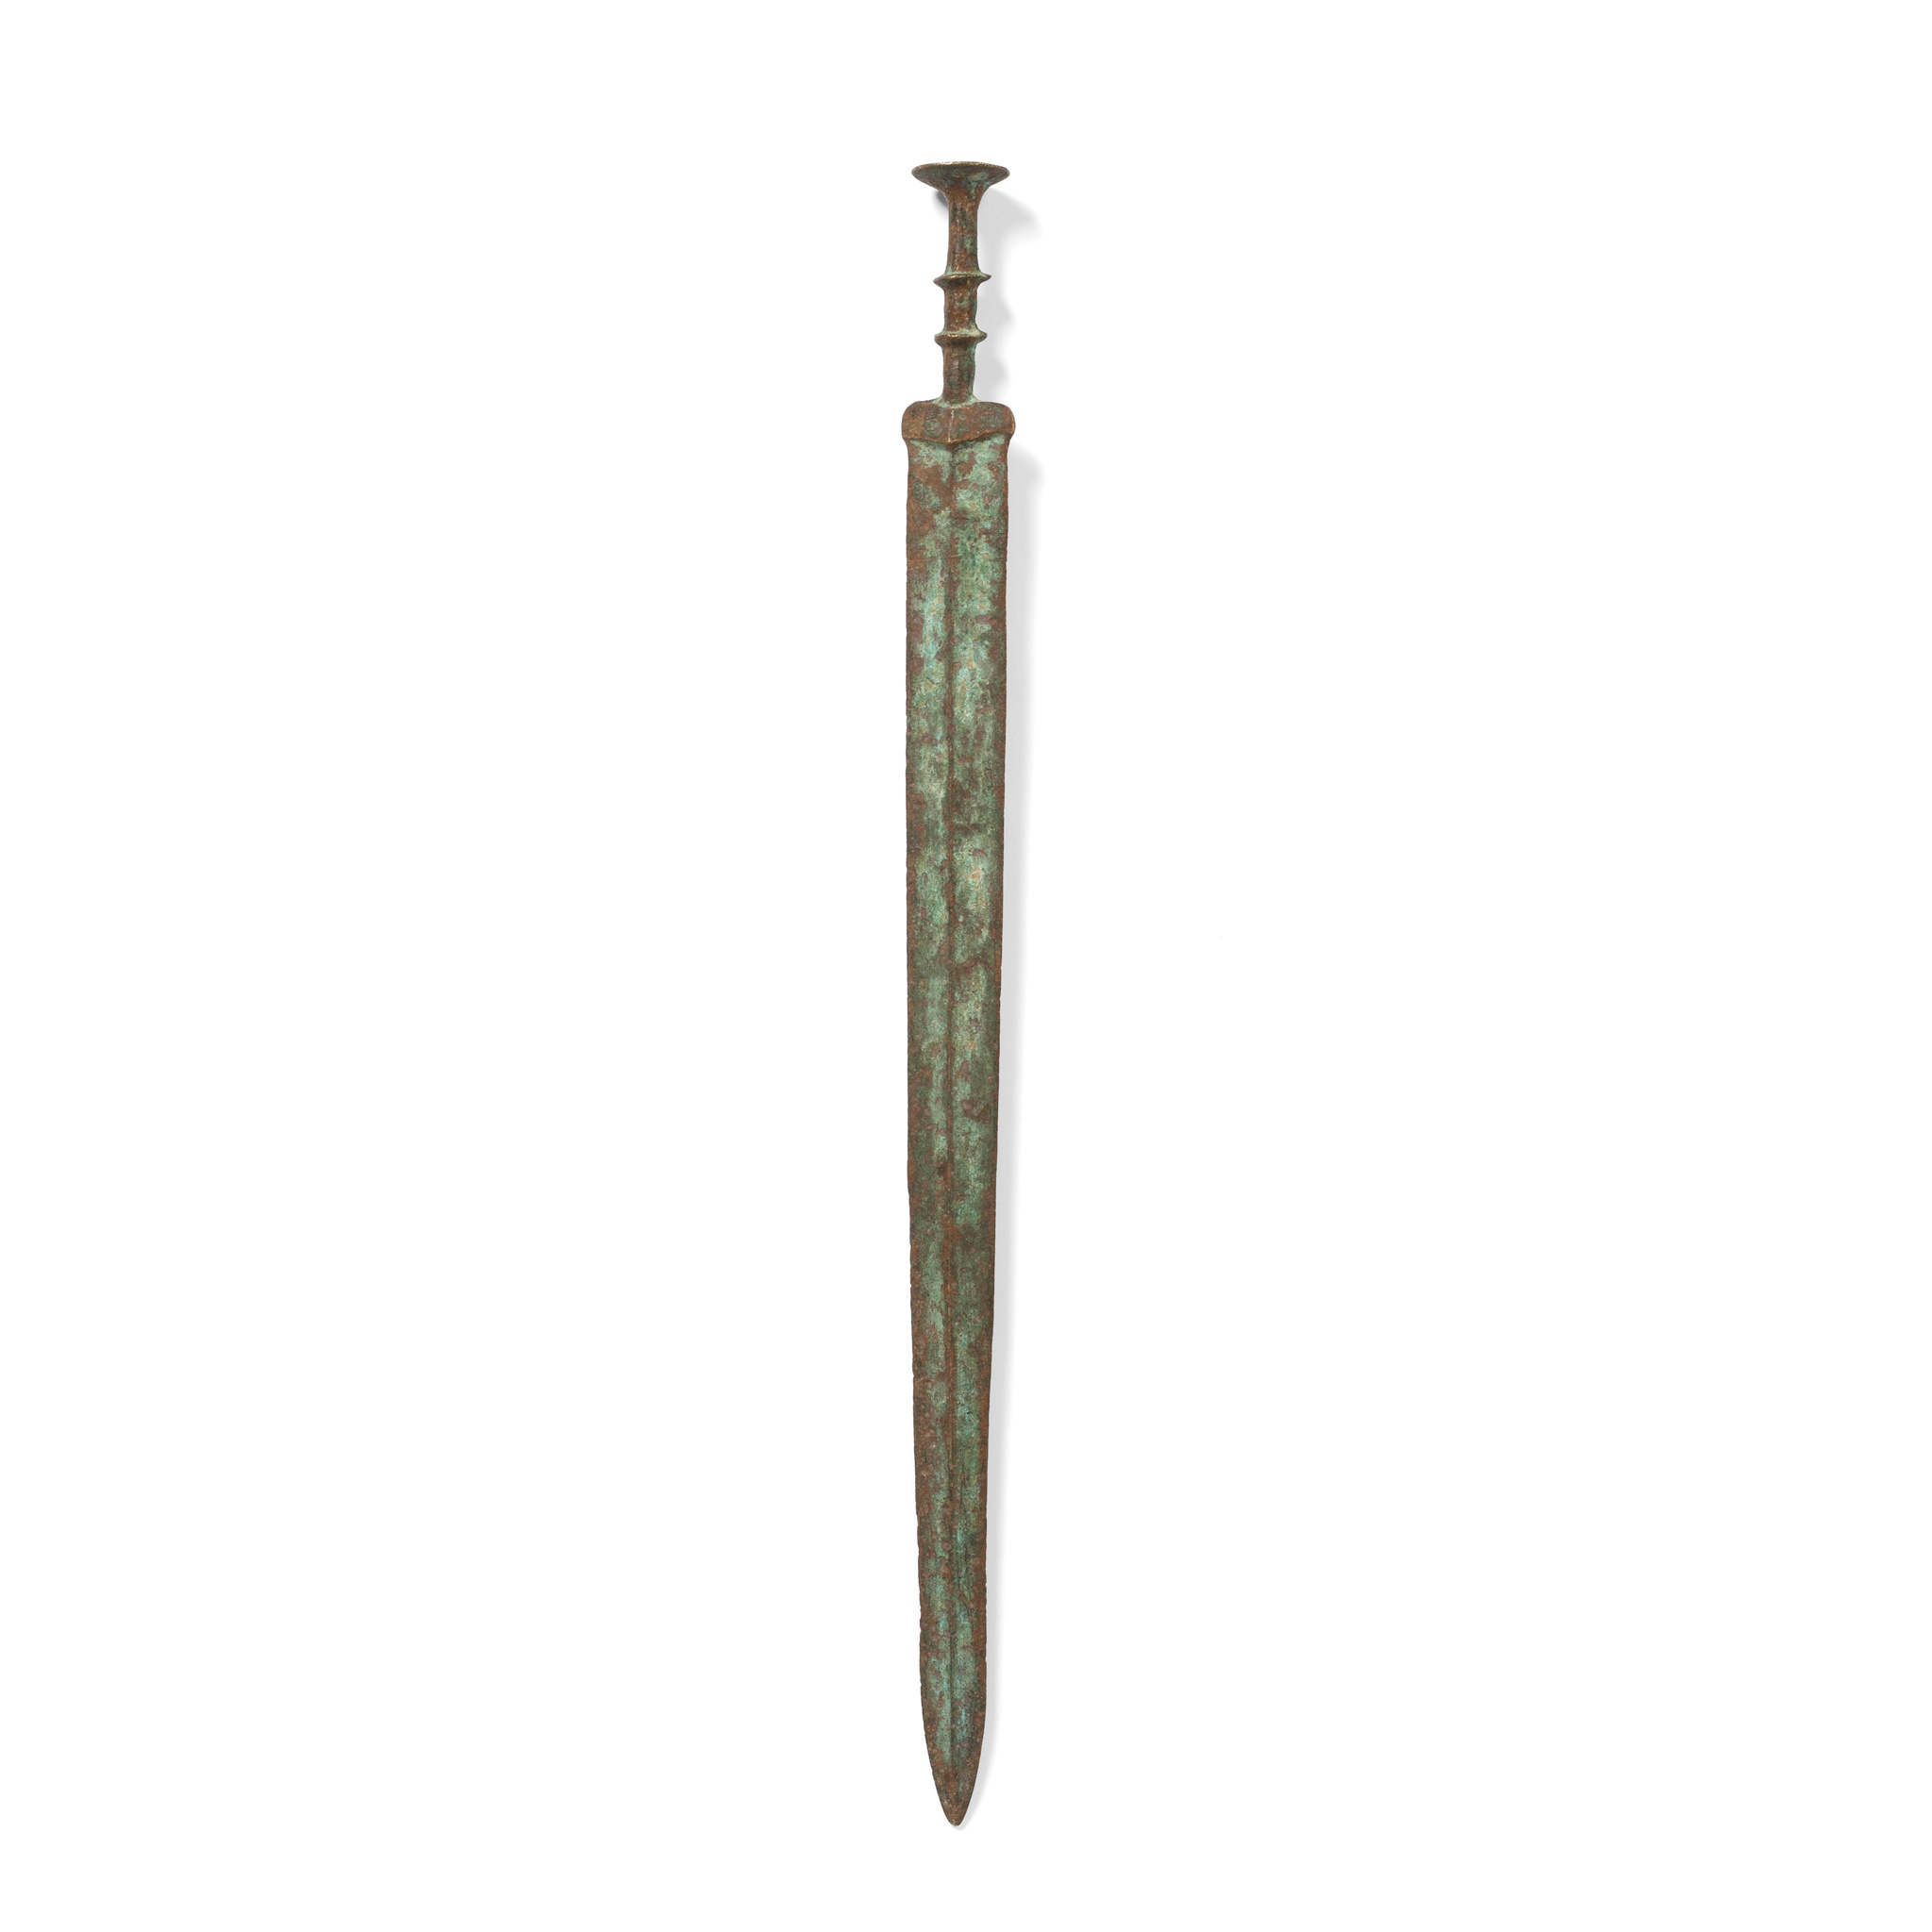 BRONZE SWORD WARRING STATES PERIOD OR LATER - Image 2 of 2